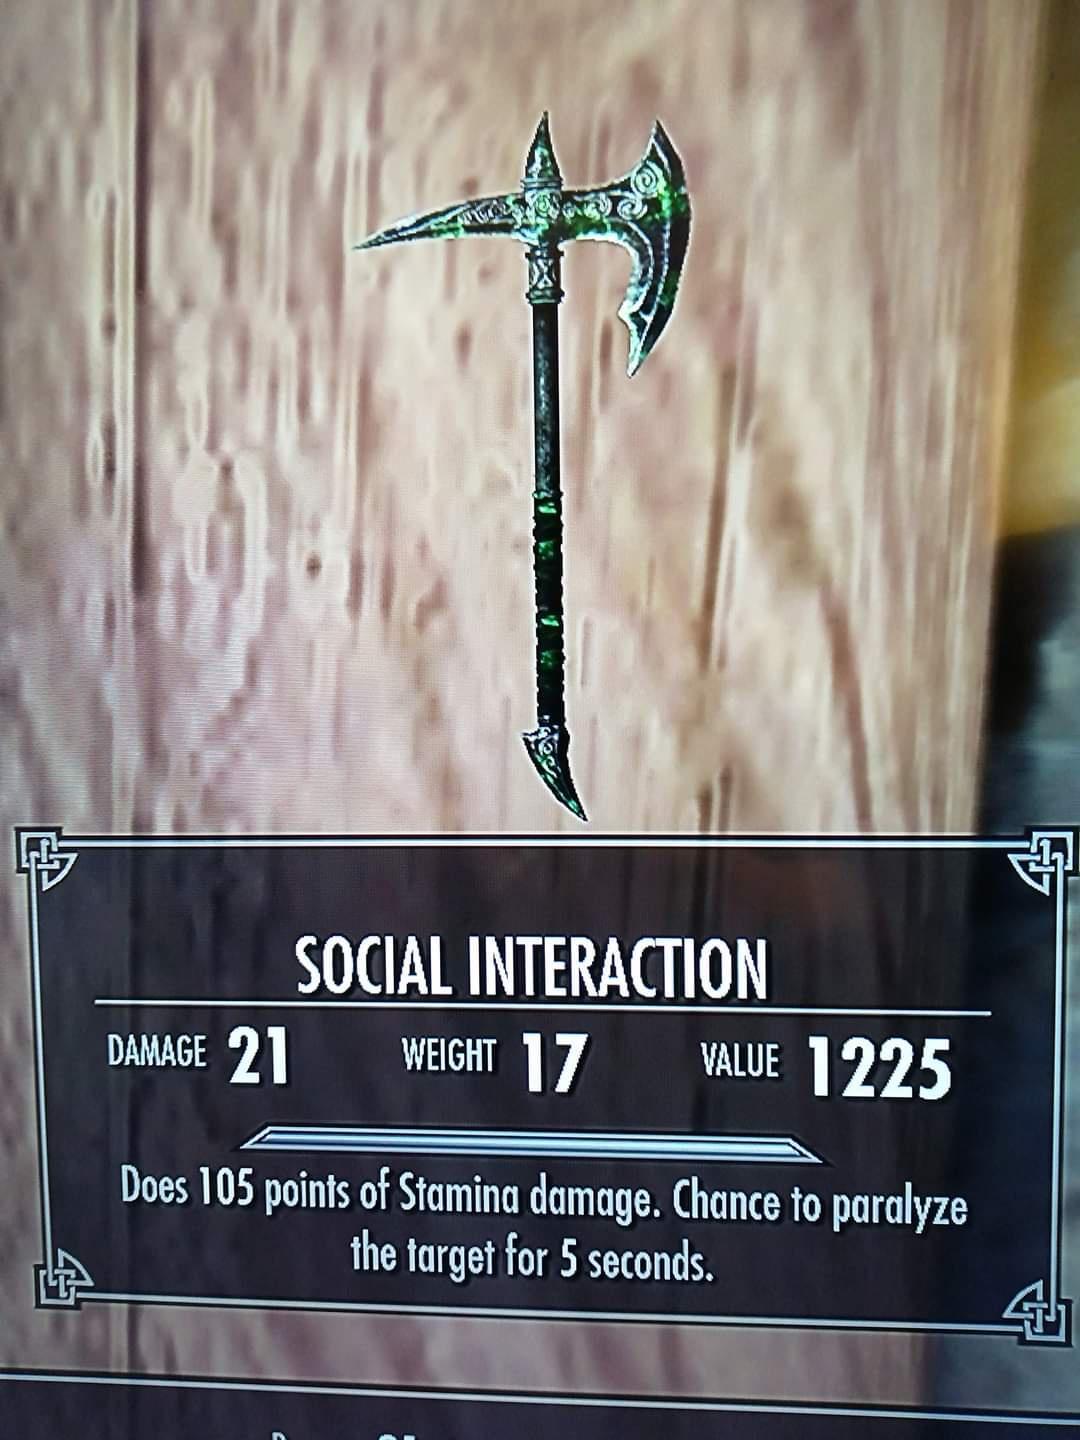 dank memes - skyrim damage meme - 5 Social Interaction Damage 21 Weight 17 Value 1225 Does 105 points of Stamina damage. Chance to paralyze the target for 5 seconds. i